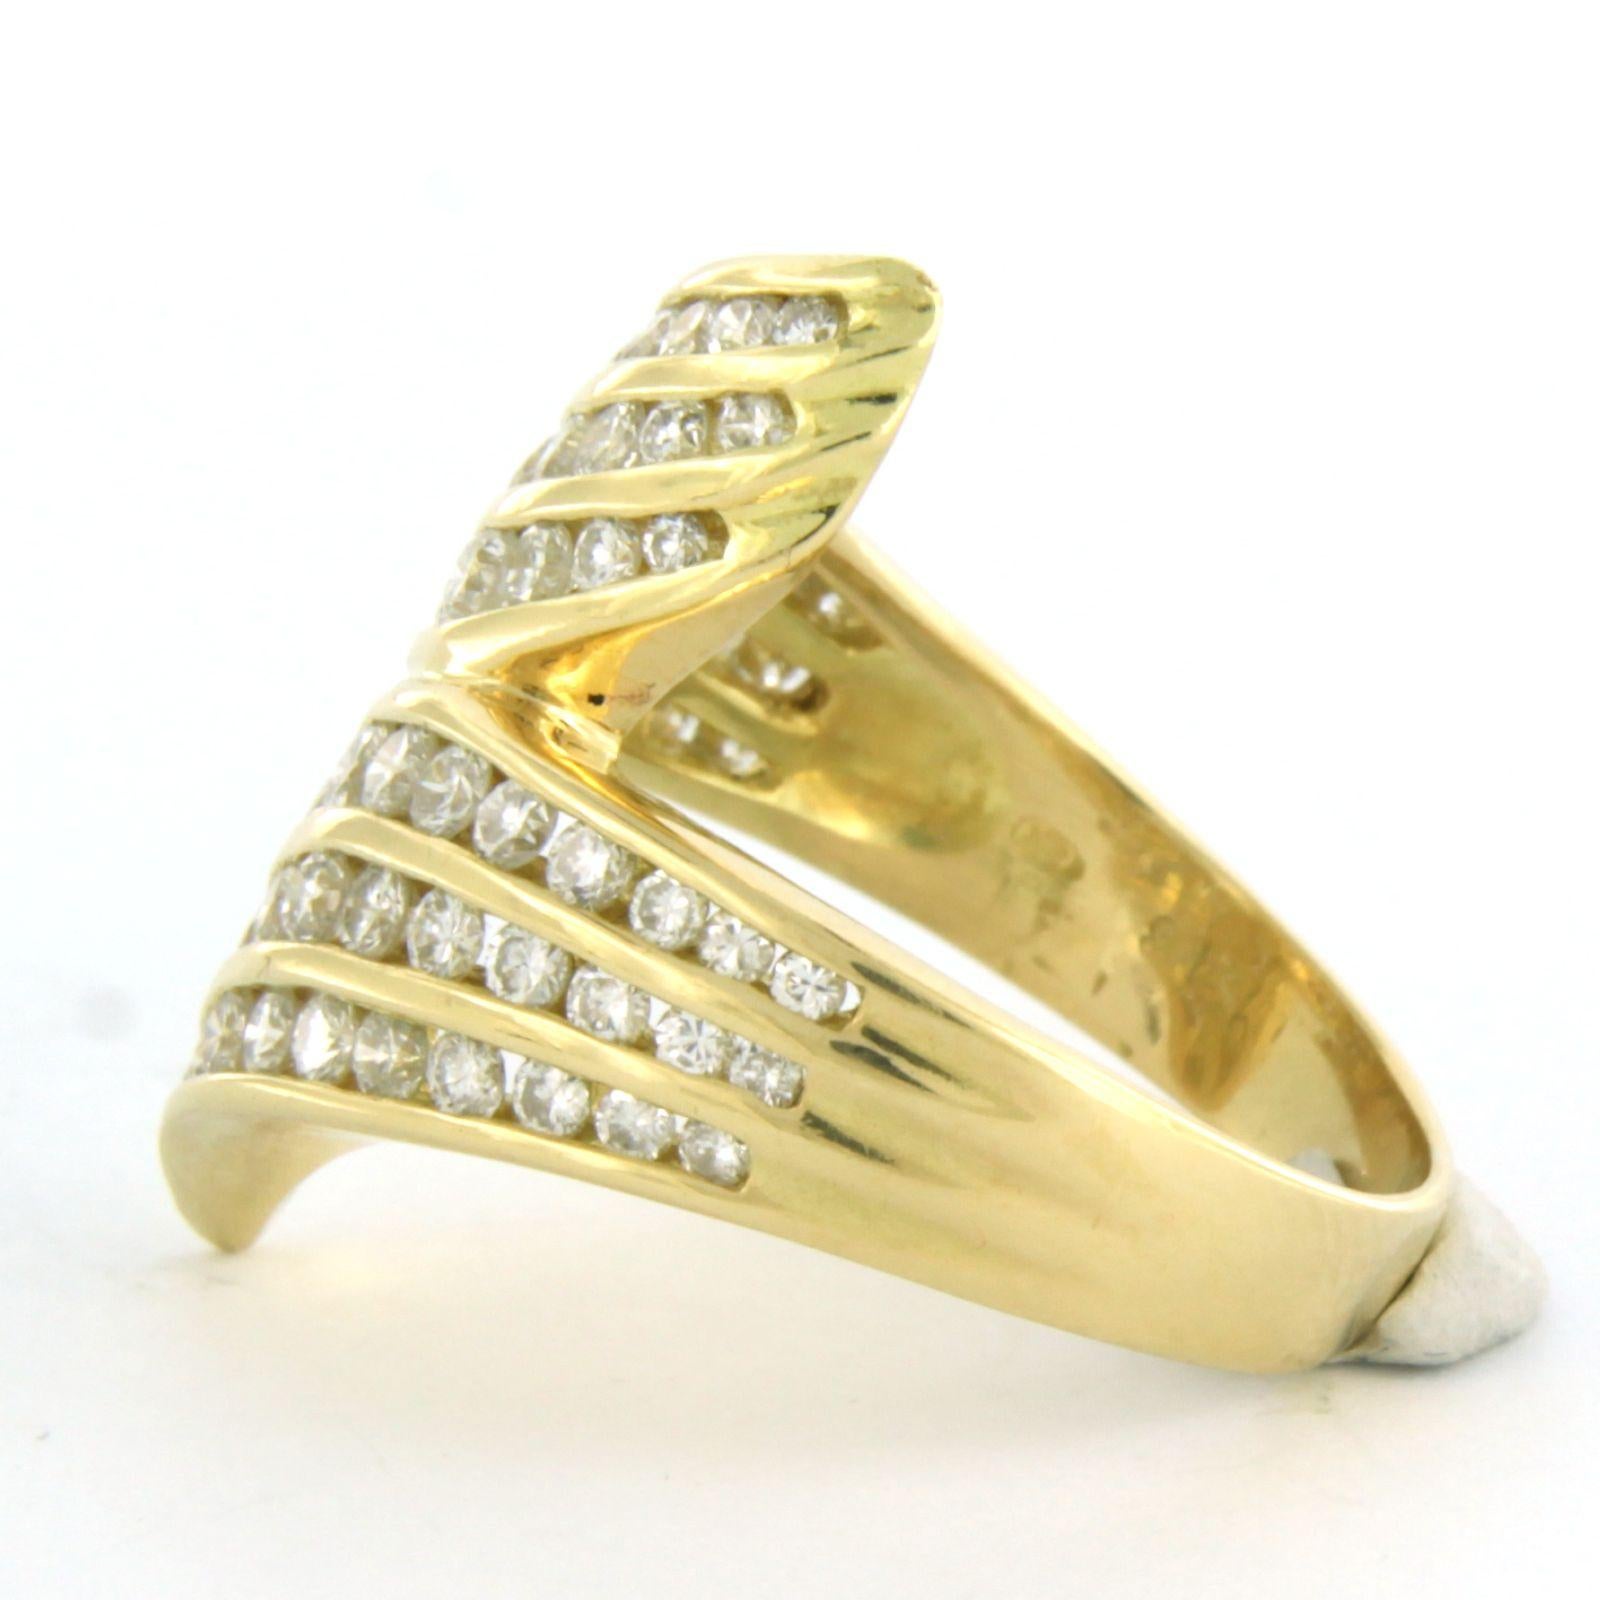 Ring Diamond in total 1.48ct 18k yellow gold For Sale 1